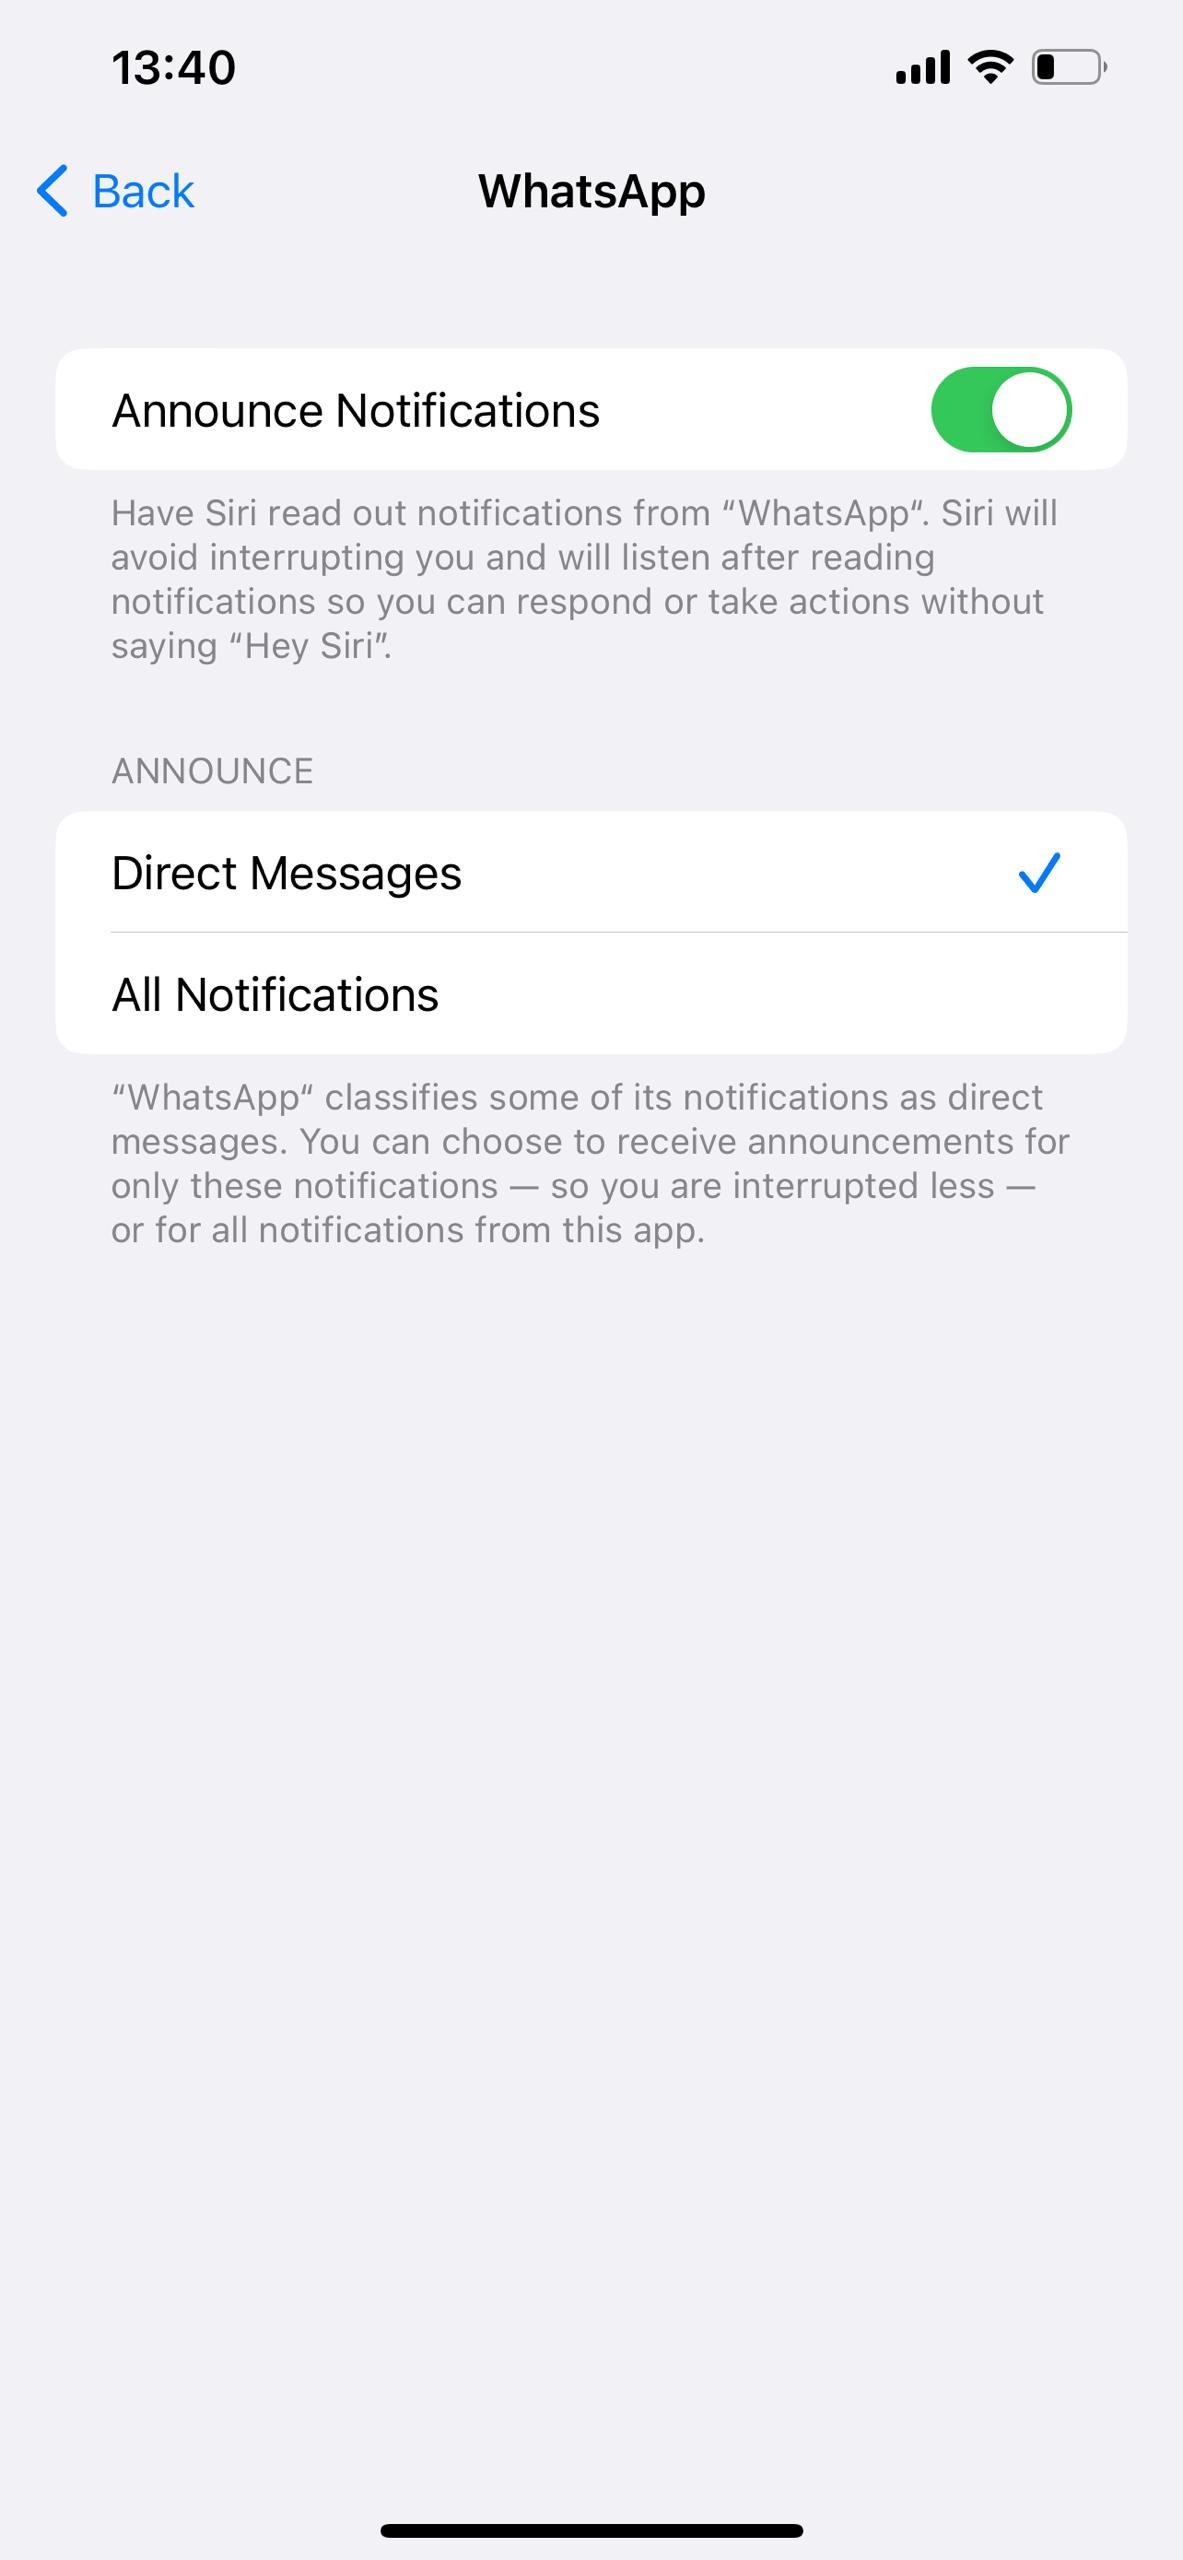 iPhone Announce Notification settings for WhatsApp